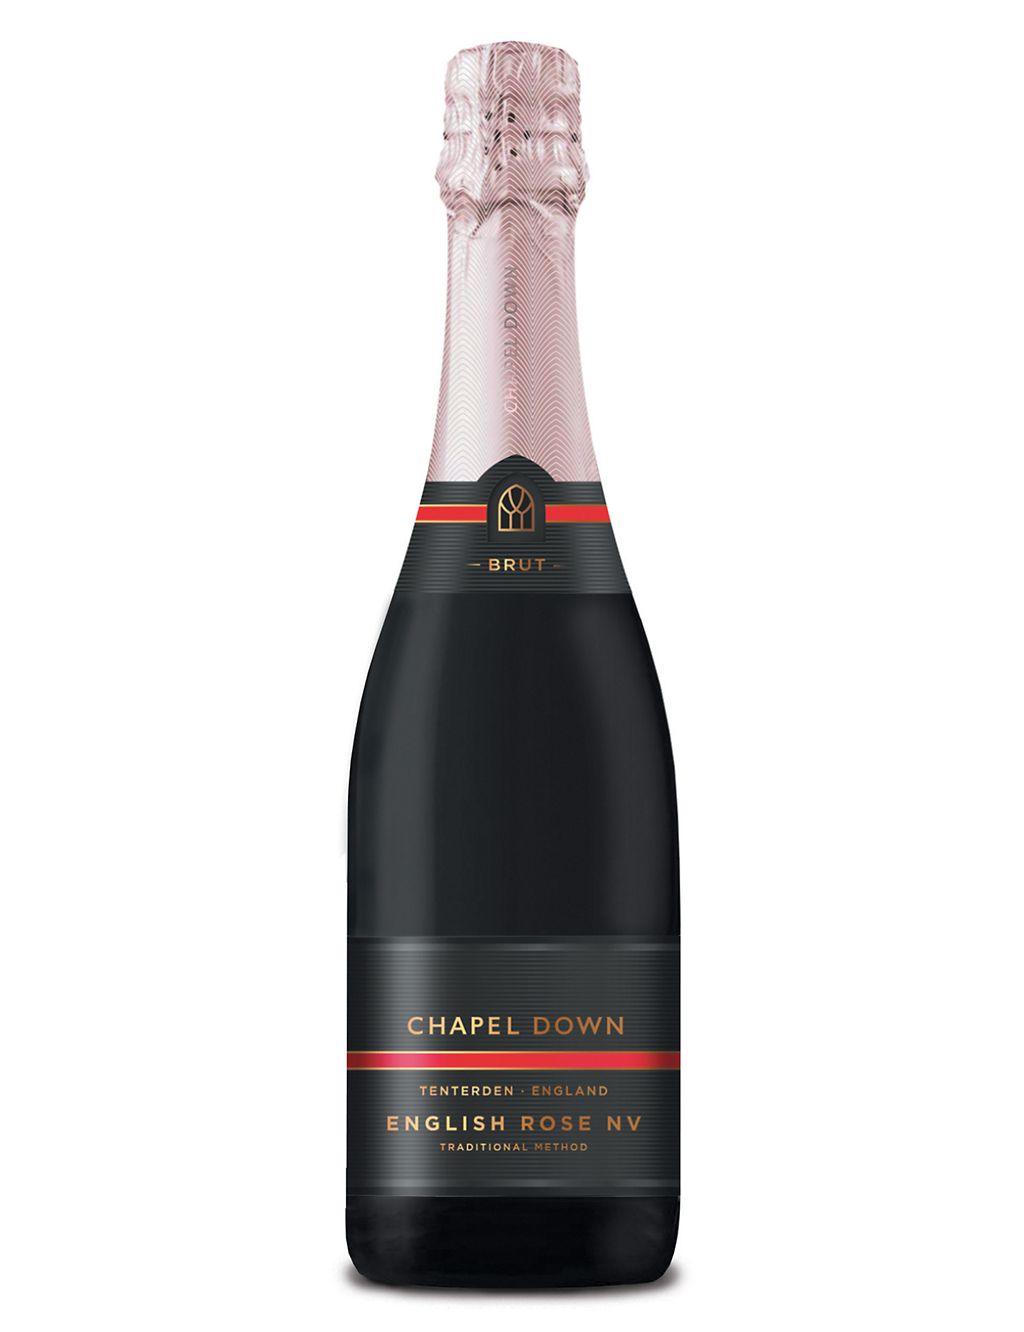 Chapel Down English Sparkling Rosé Brut - Case of 6 3 of 4